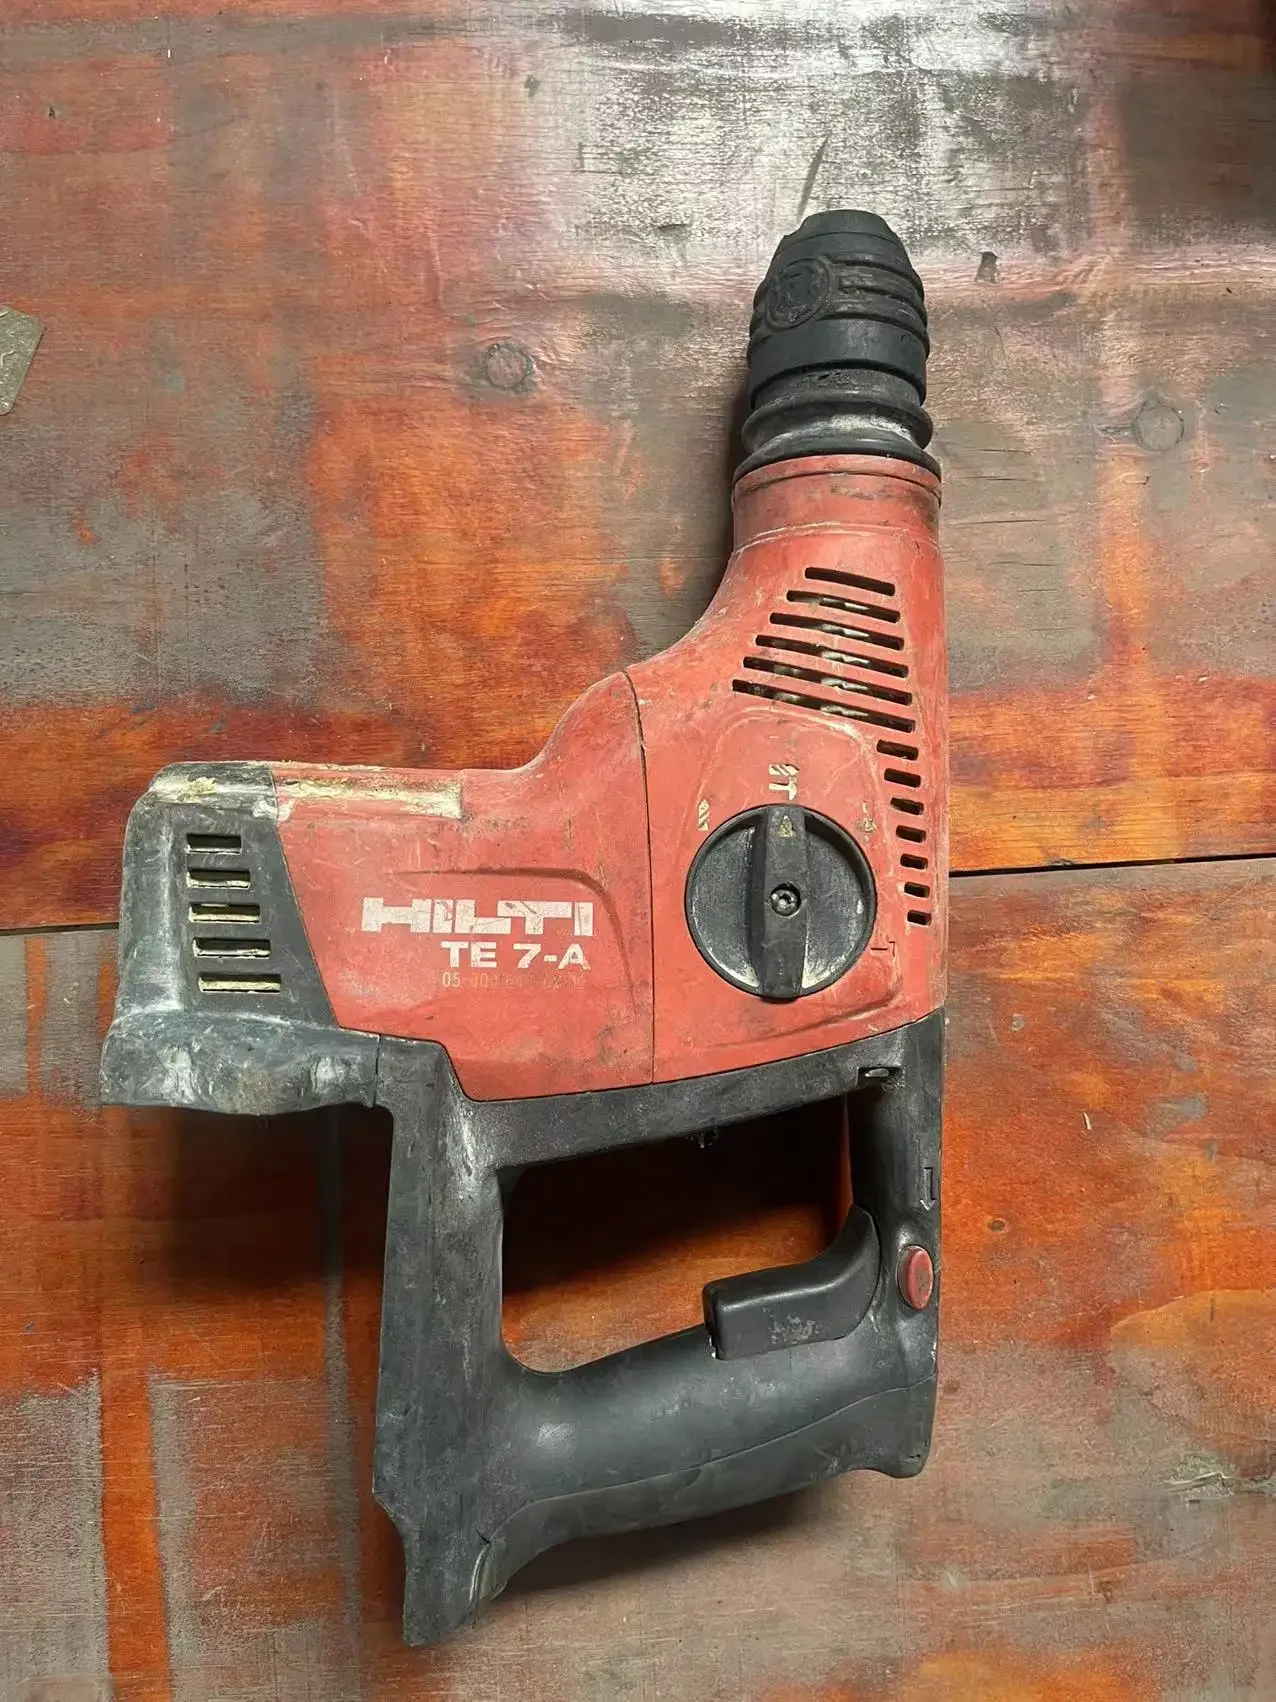 Hilti TE 7-A 36 Heavy Duty HAMMER .USED.SECOND HAND